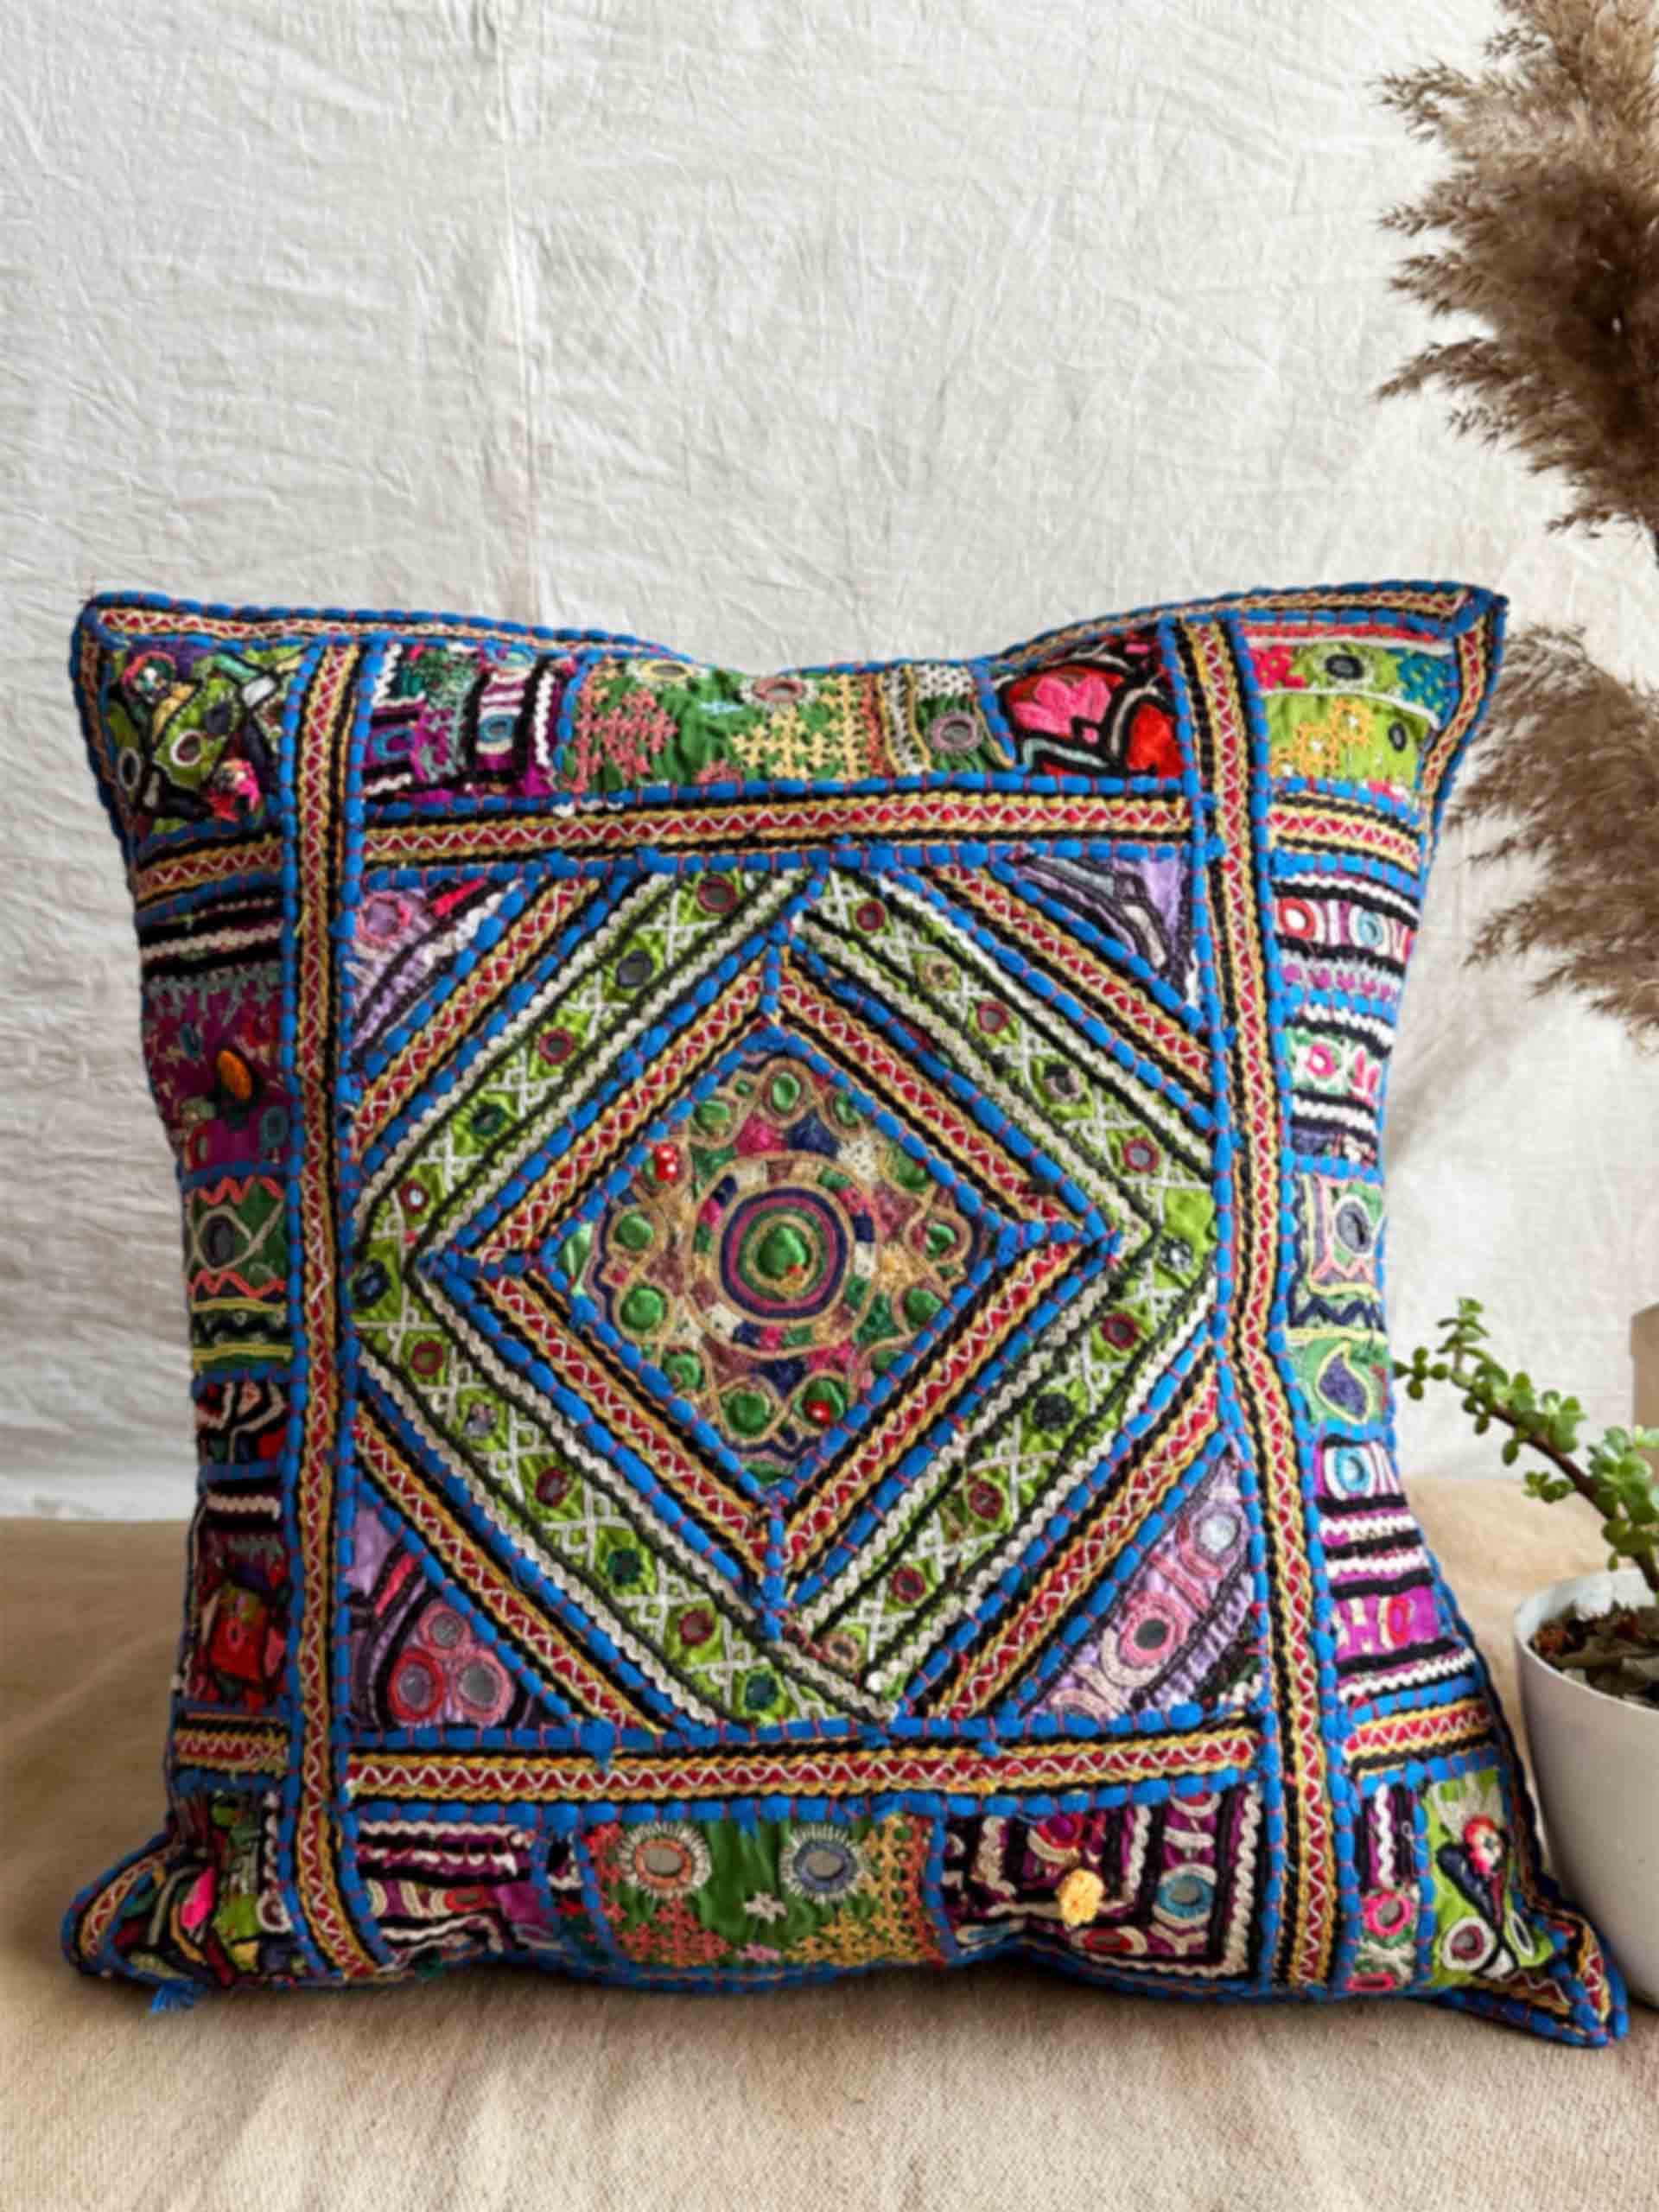 neel - hand embroidered mirror work cushion cover 18X18